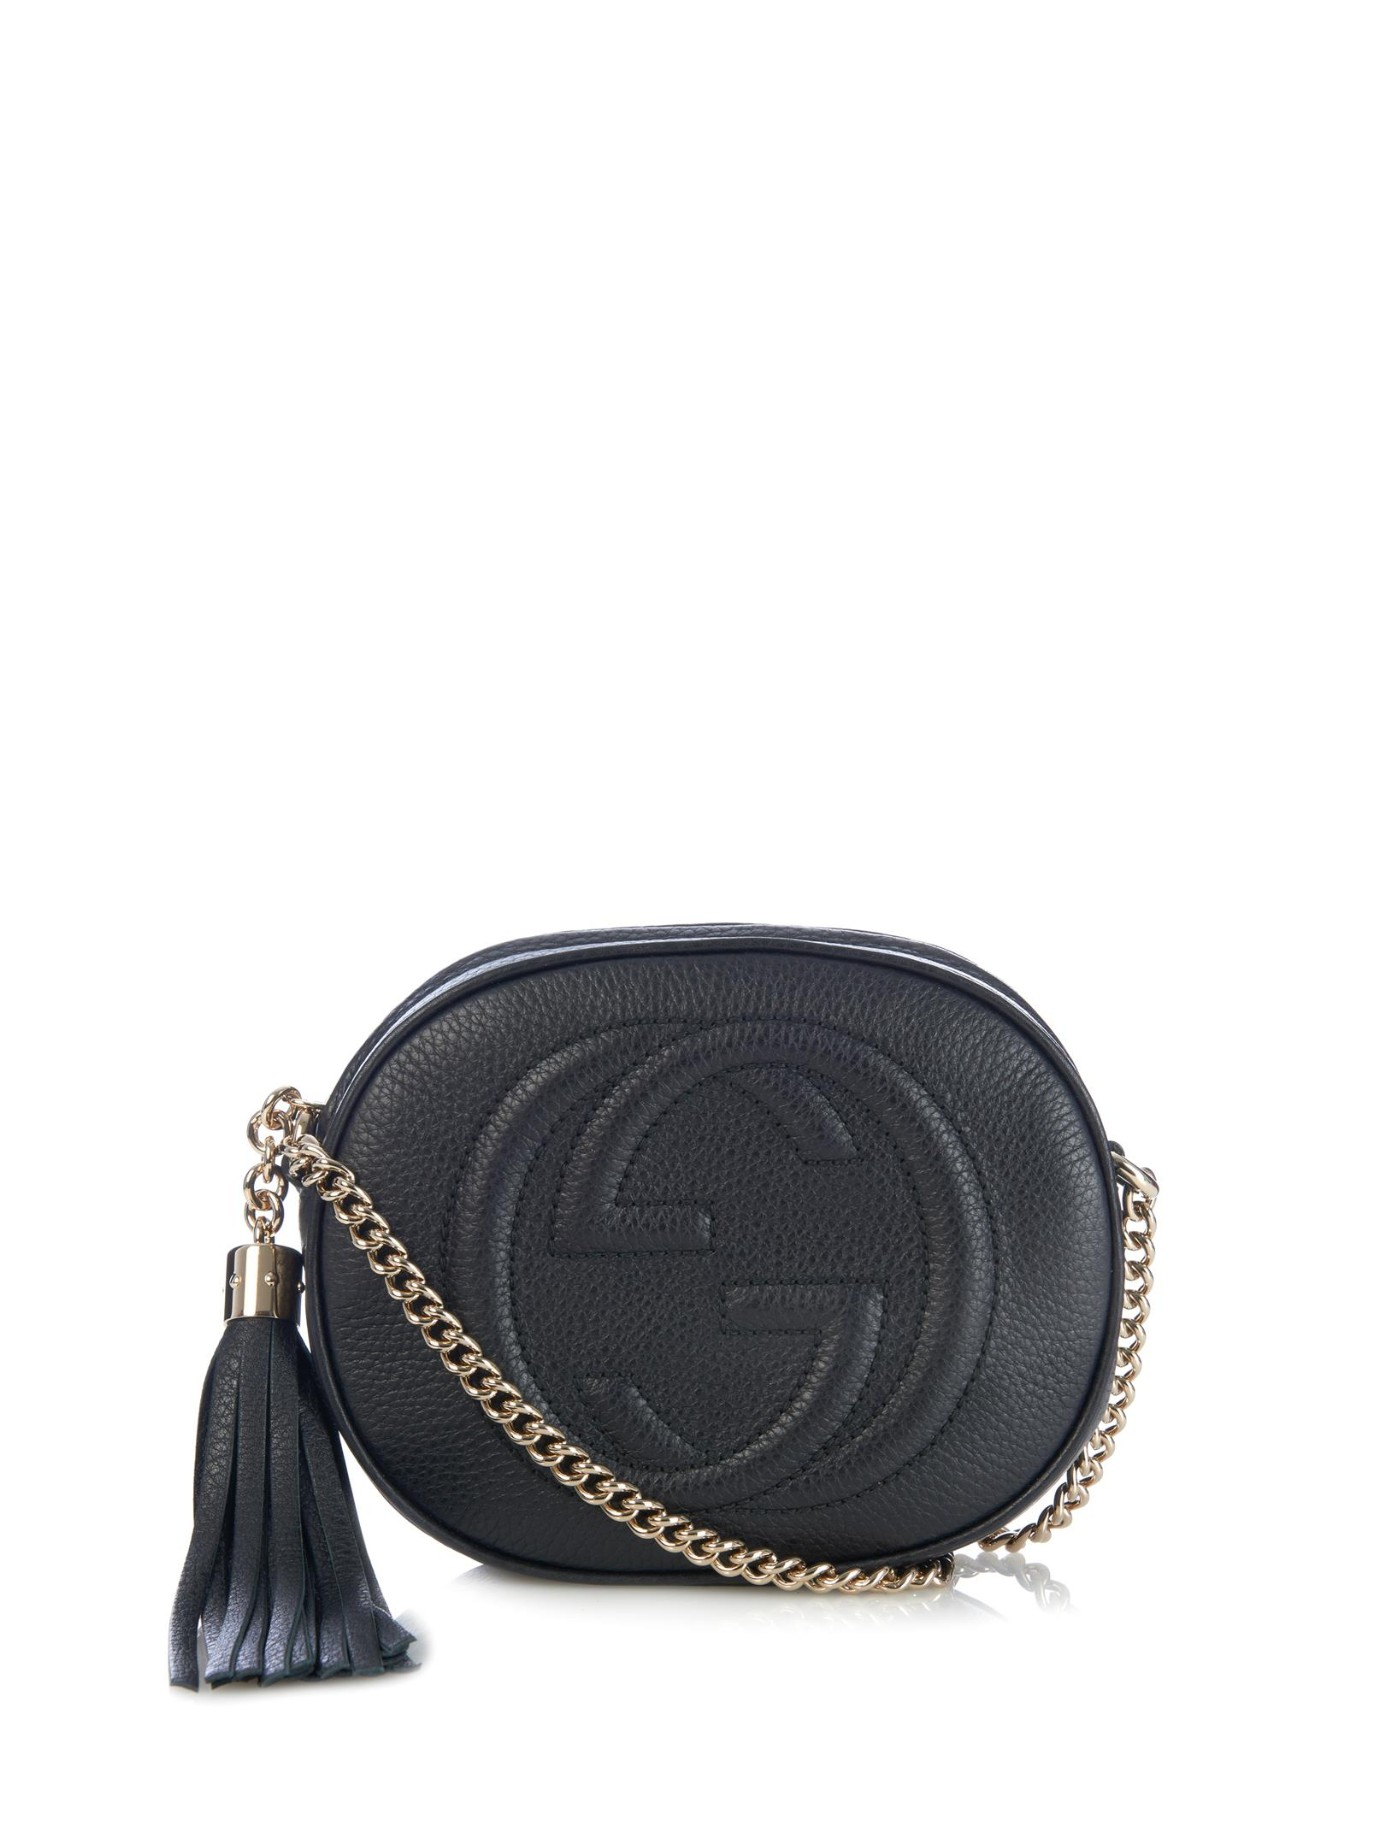 gucci crossbody bag with chain strap